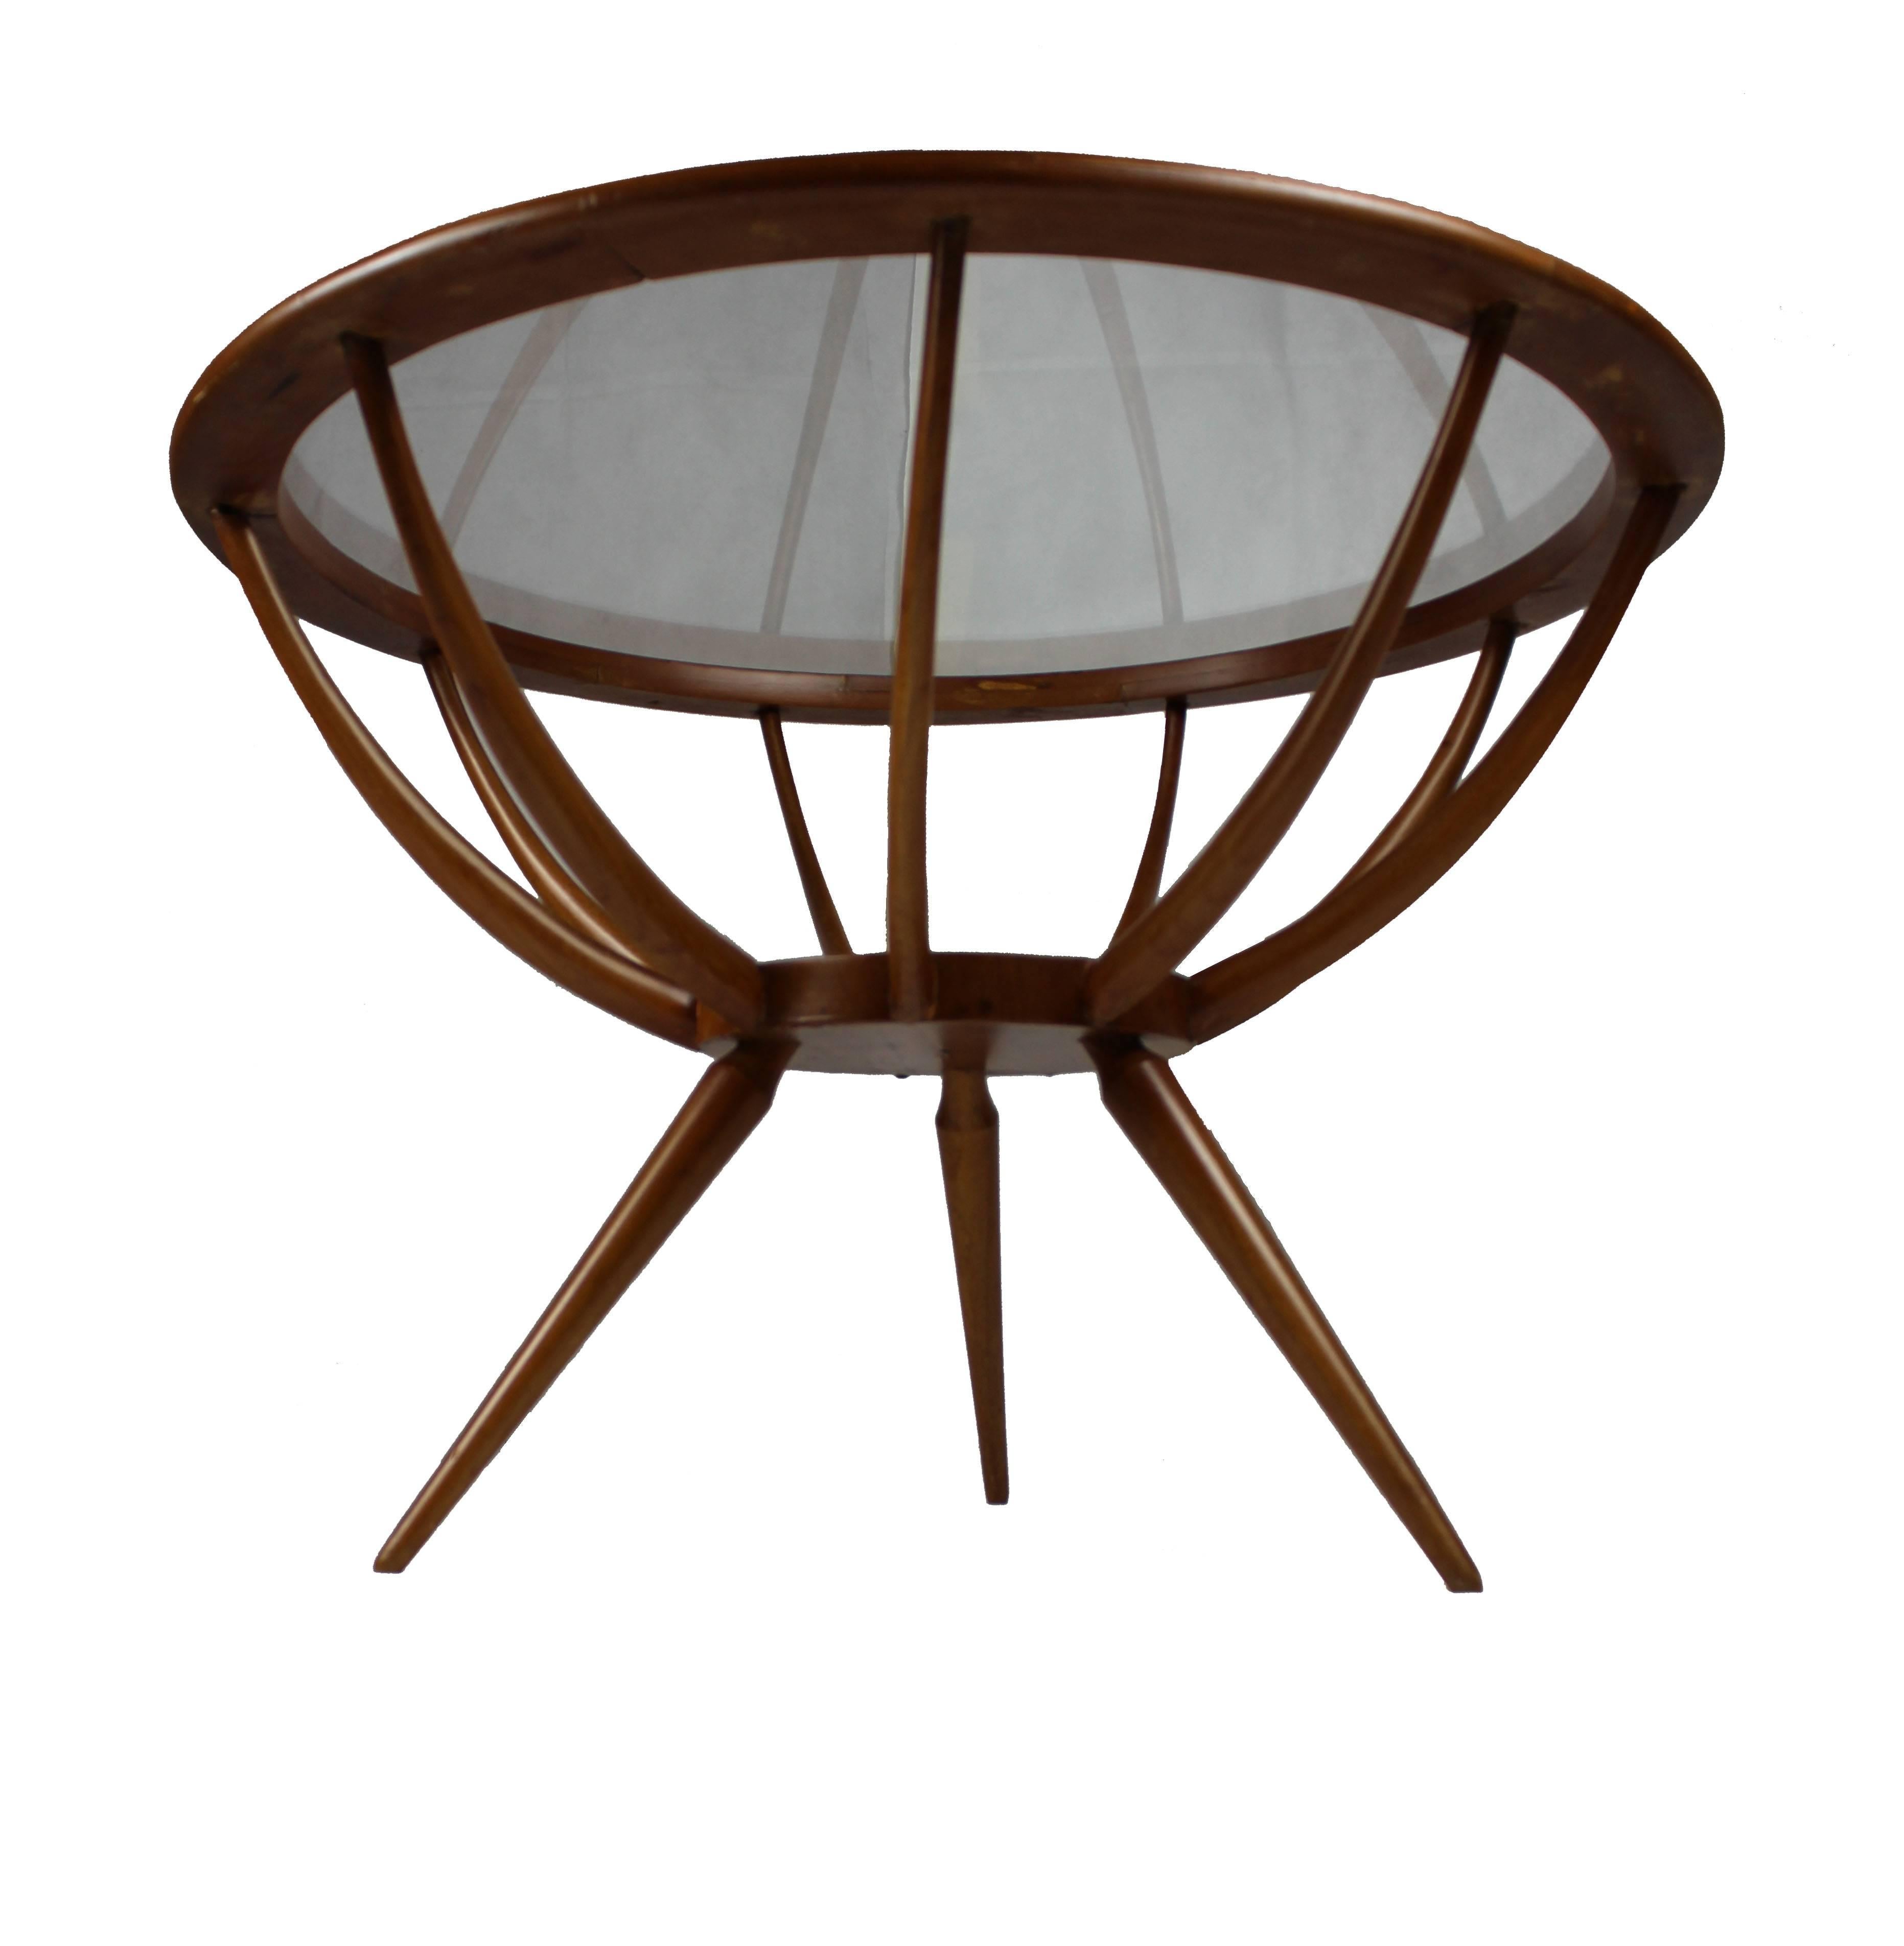 Spider table made of olivewood and glass. The glass is sustained by a brass ring. Made in Italy, circa 1950s. Restored.